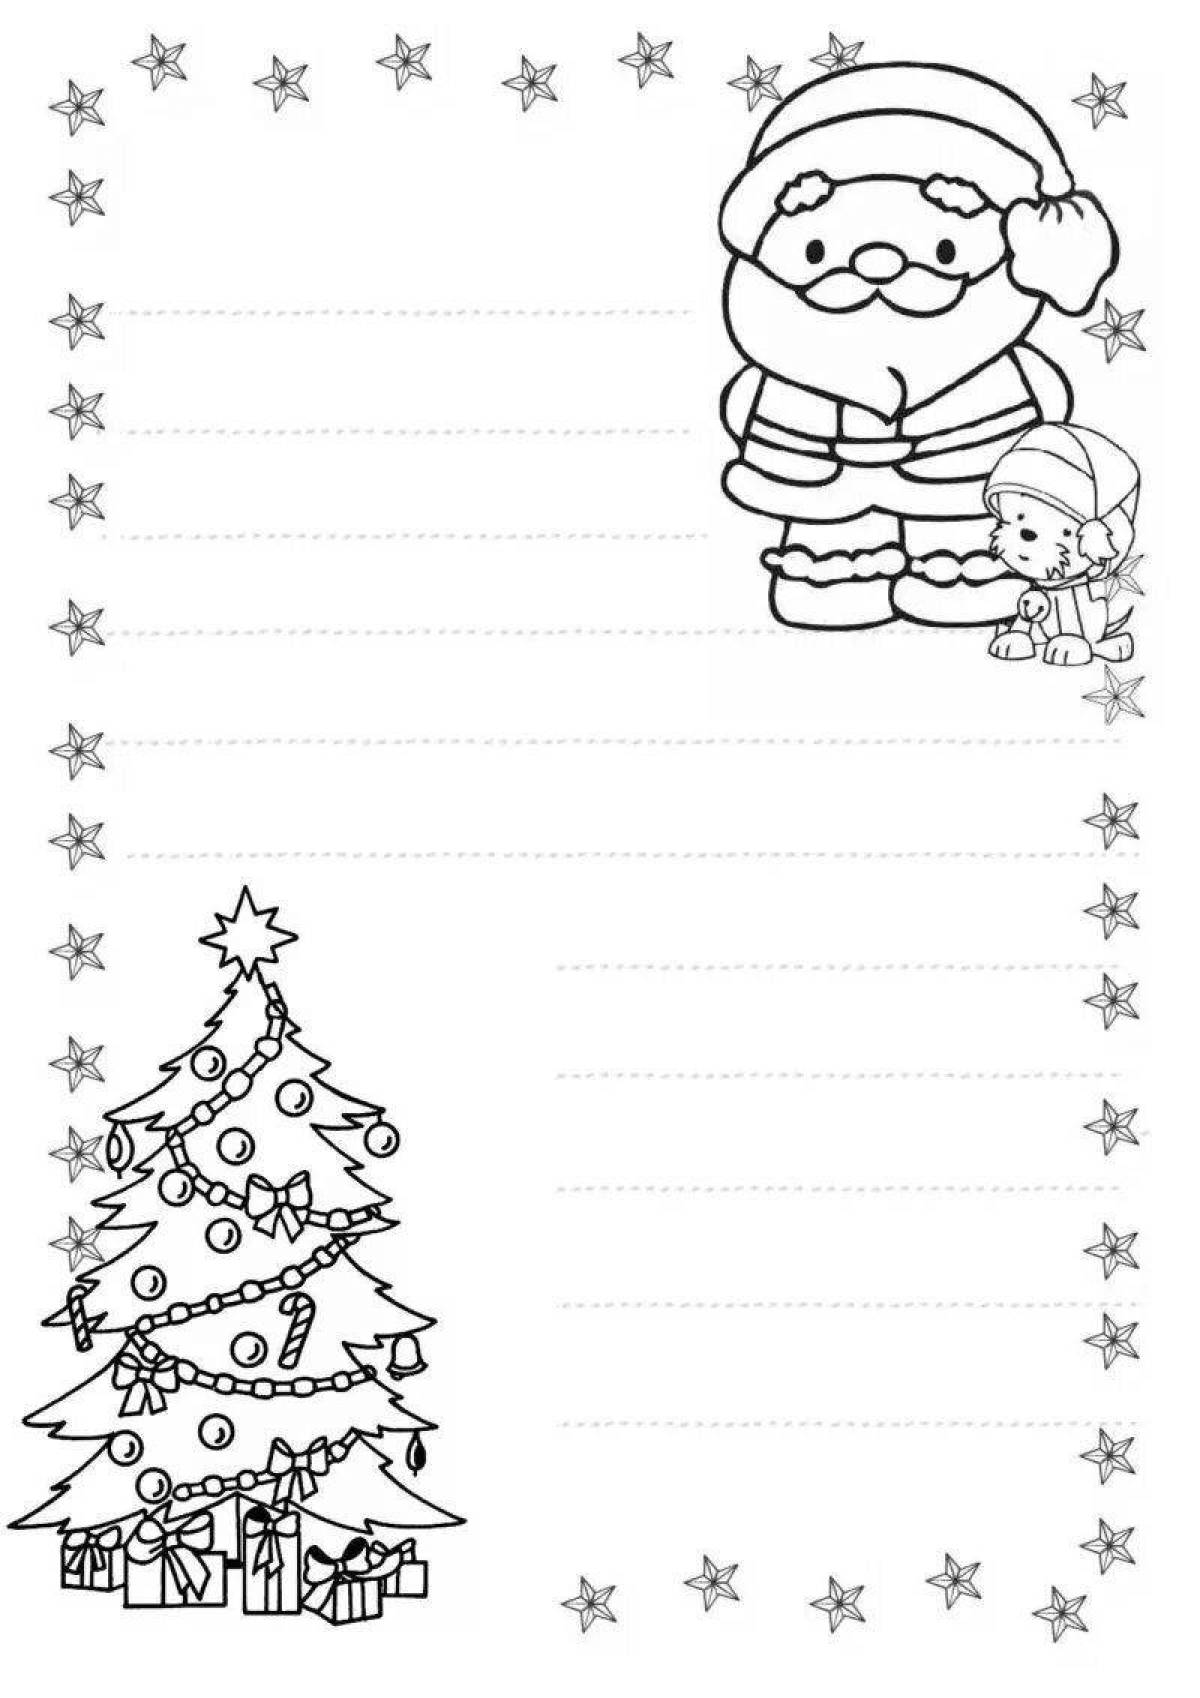 Radiant coloring page letter to santa claus template